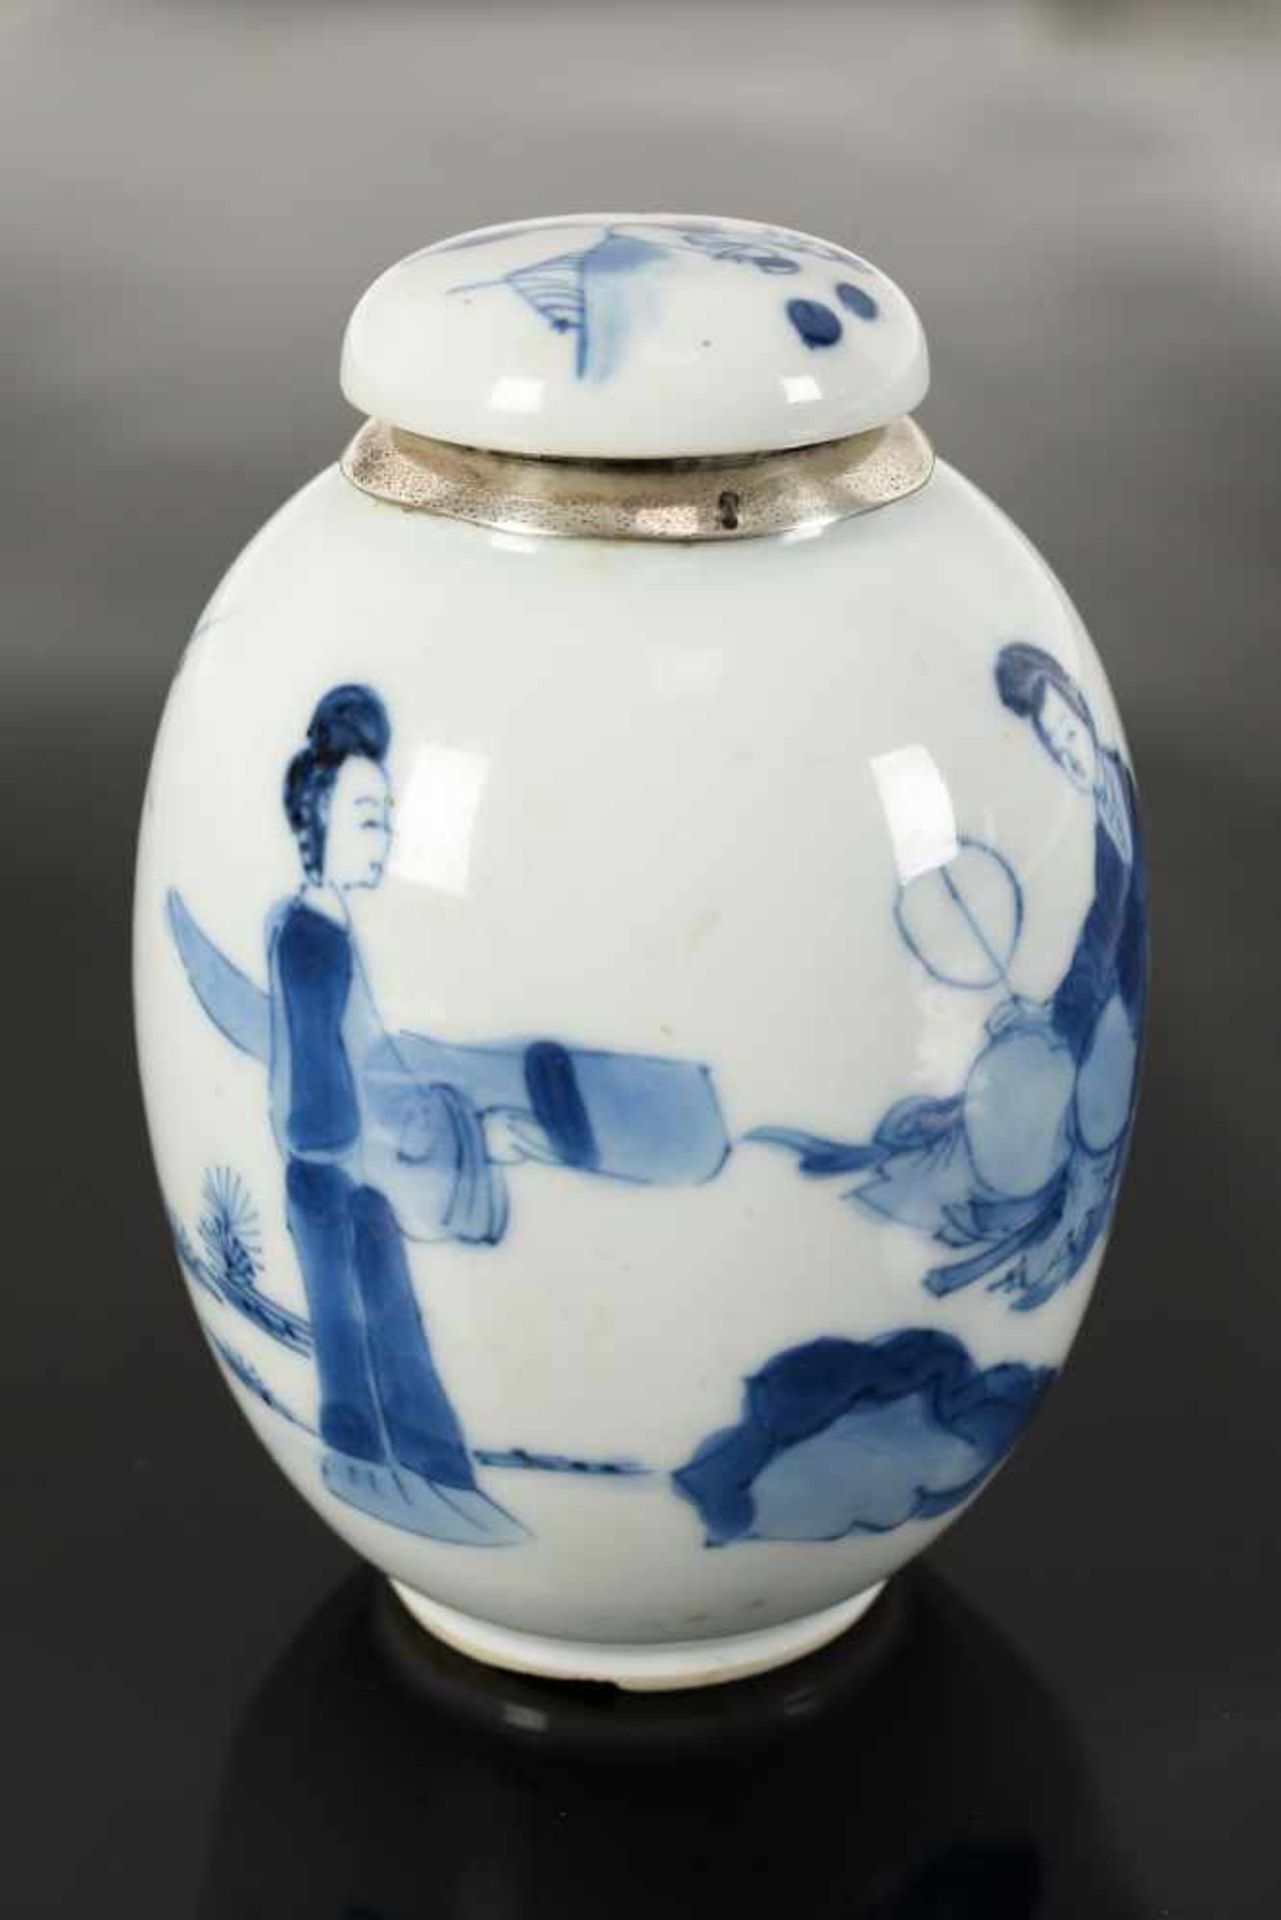 A blue and white porcelain lidded jar with later Dutch silver mounting, decorated with figures in - Image 8 of 11